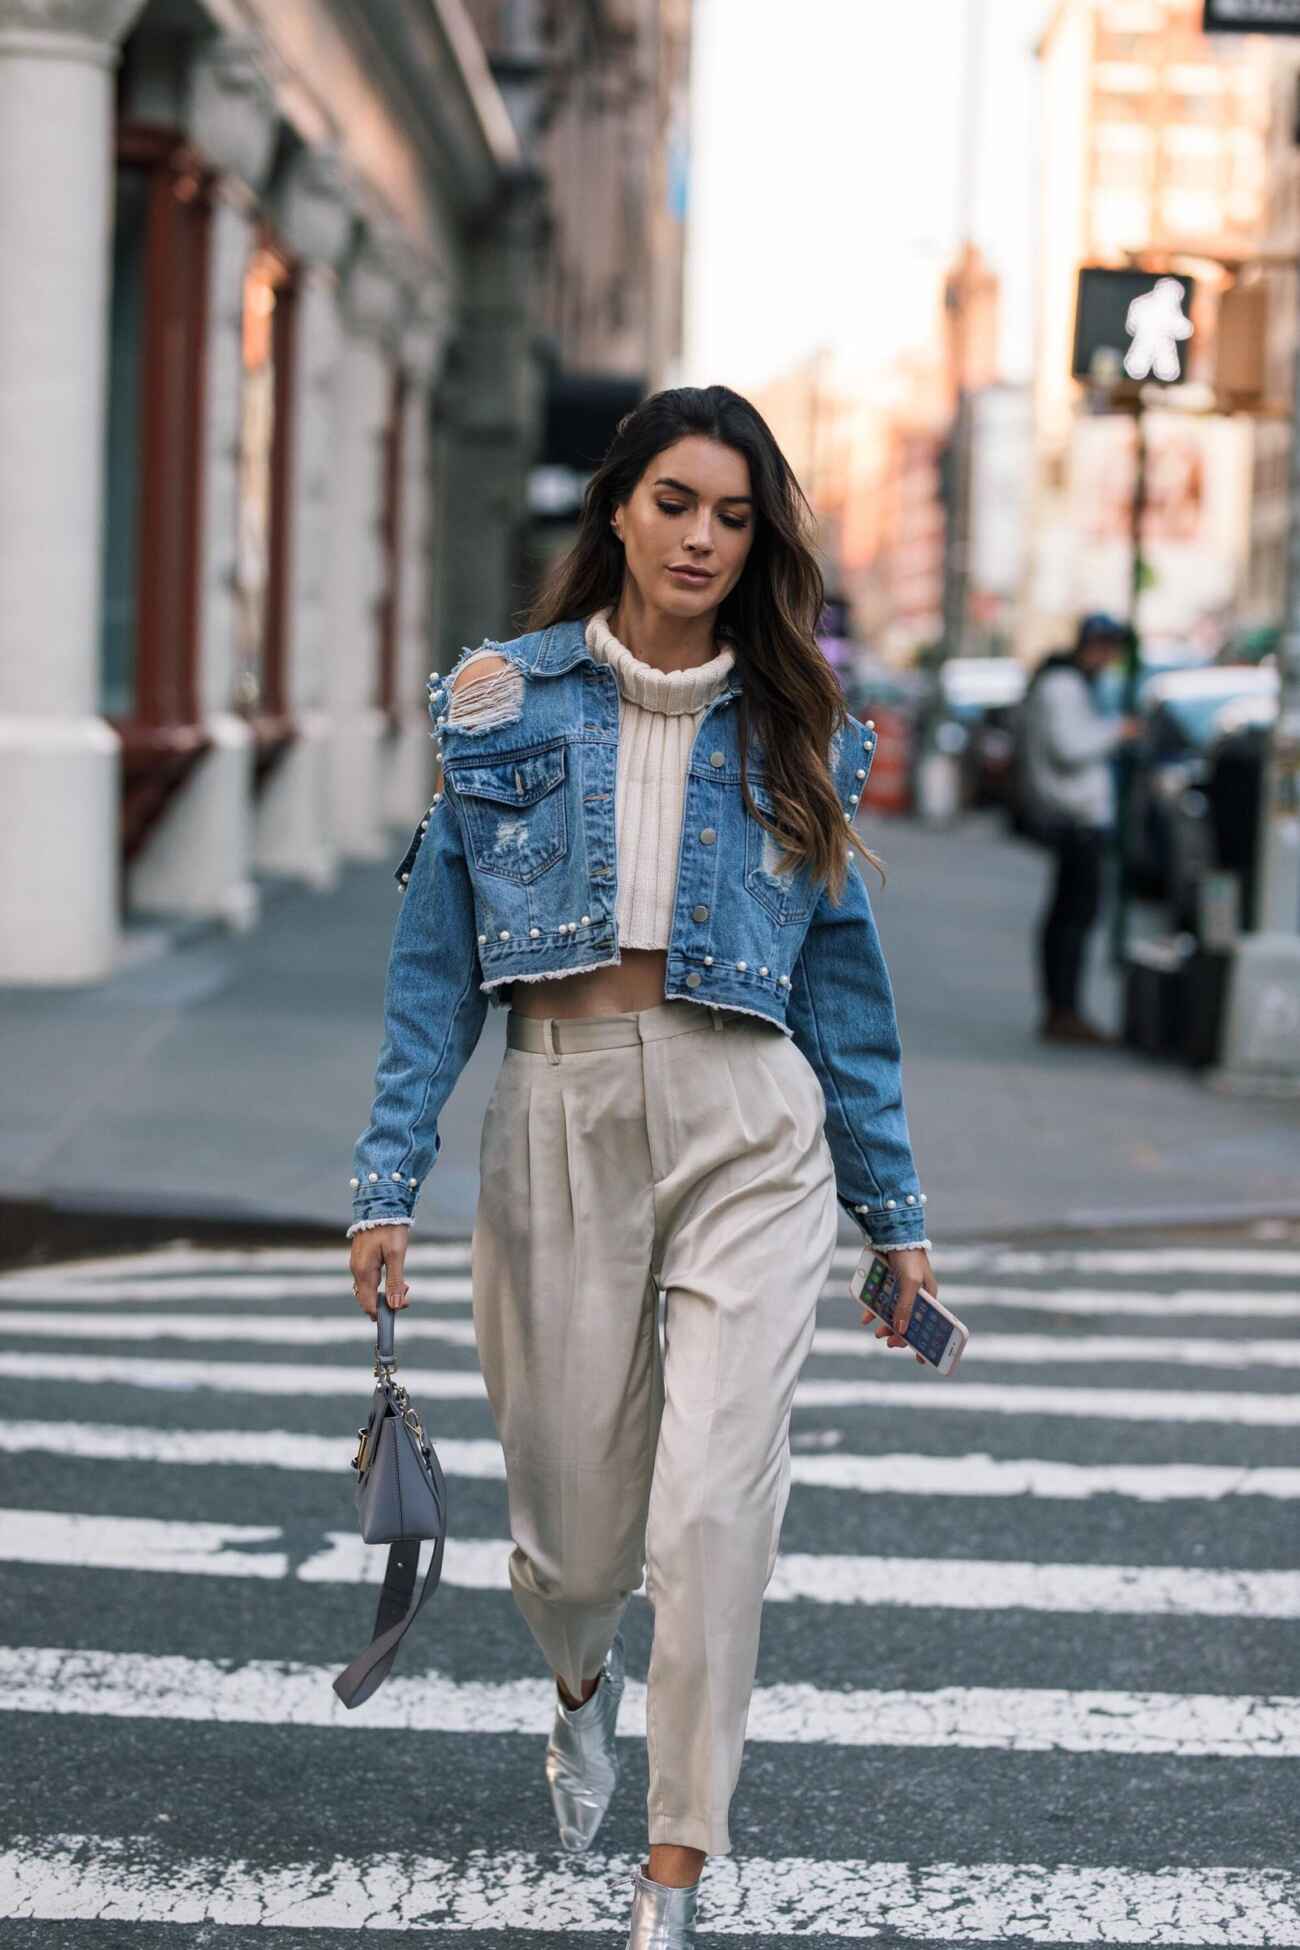 New York Fashion Week Day 3 & 4 | Thrifts and Threads